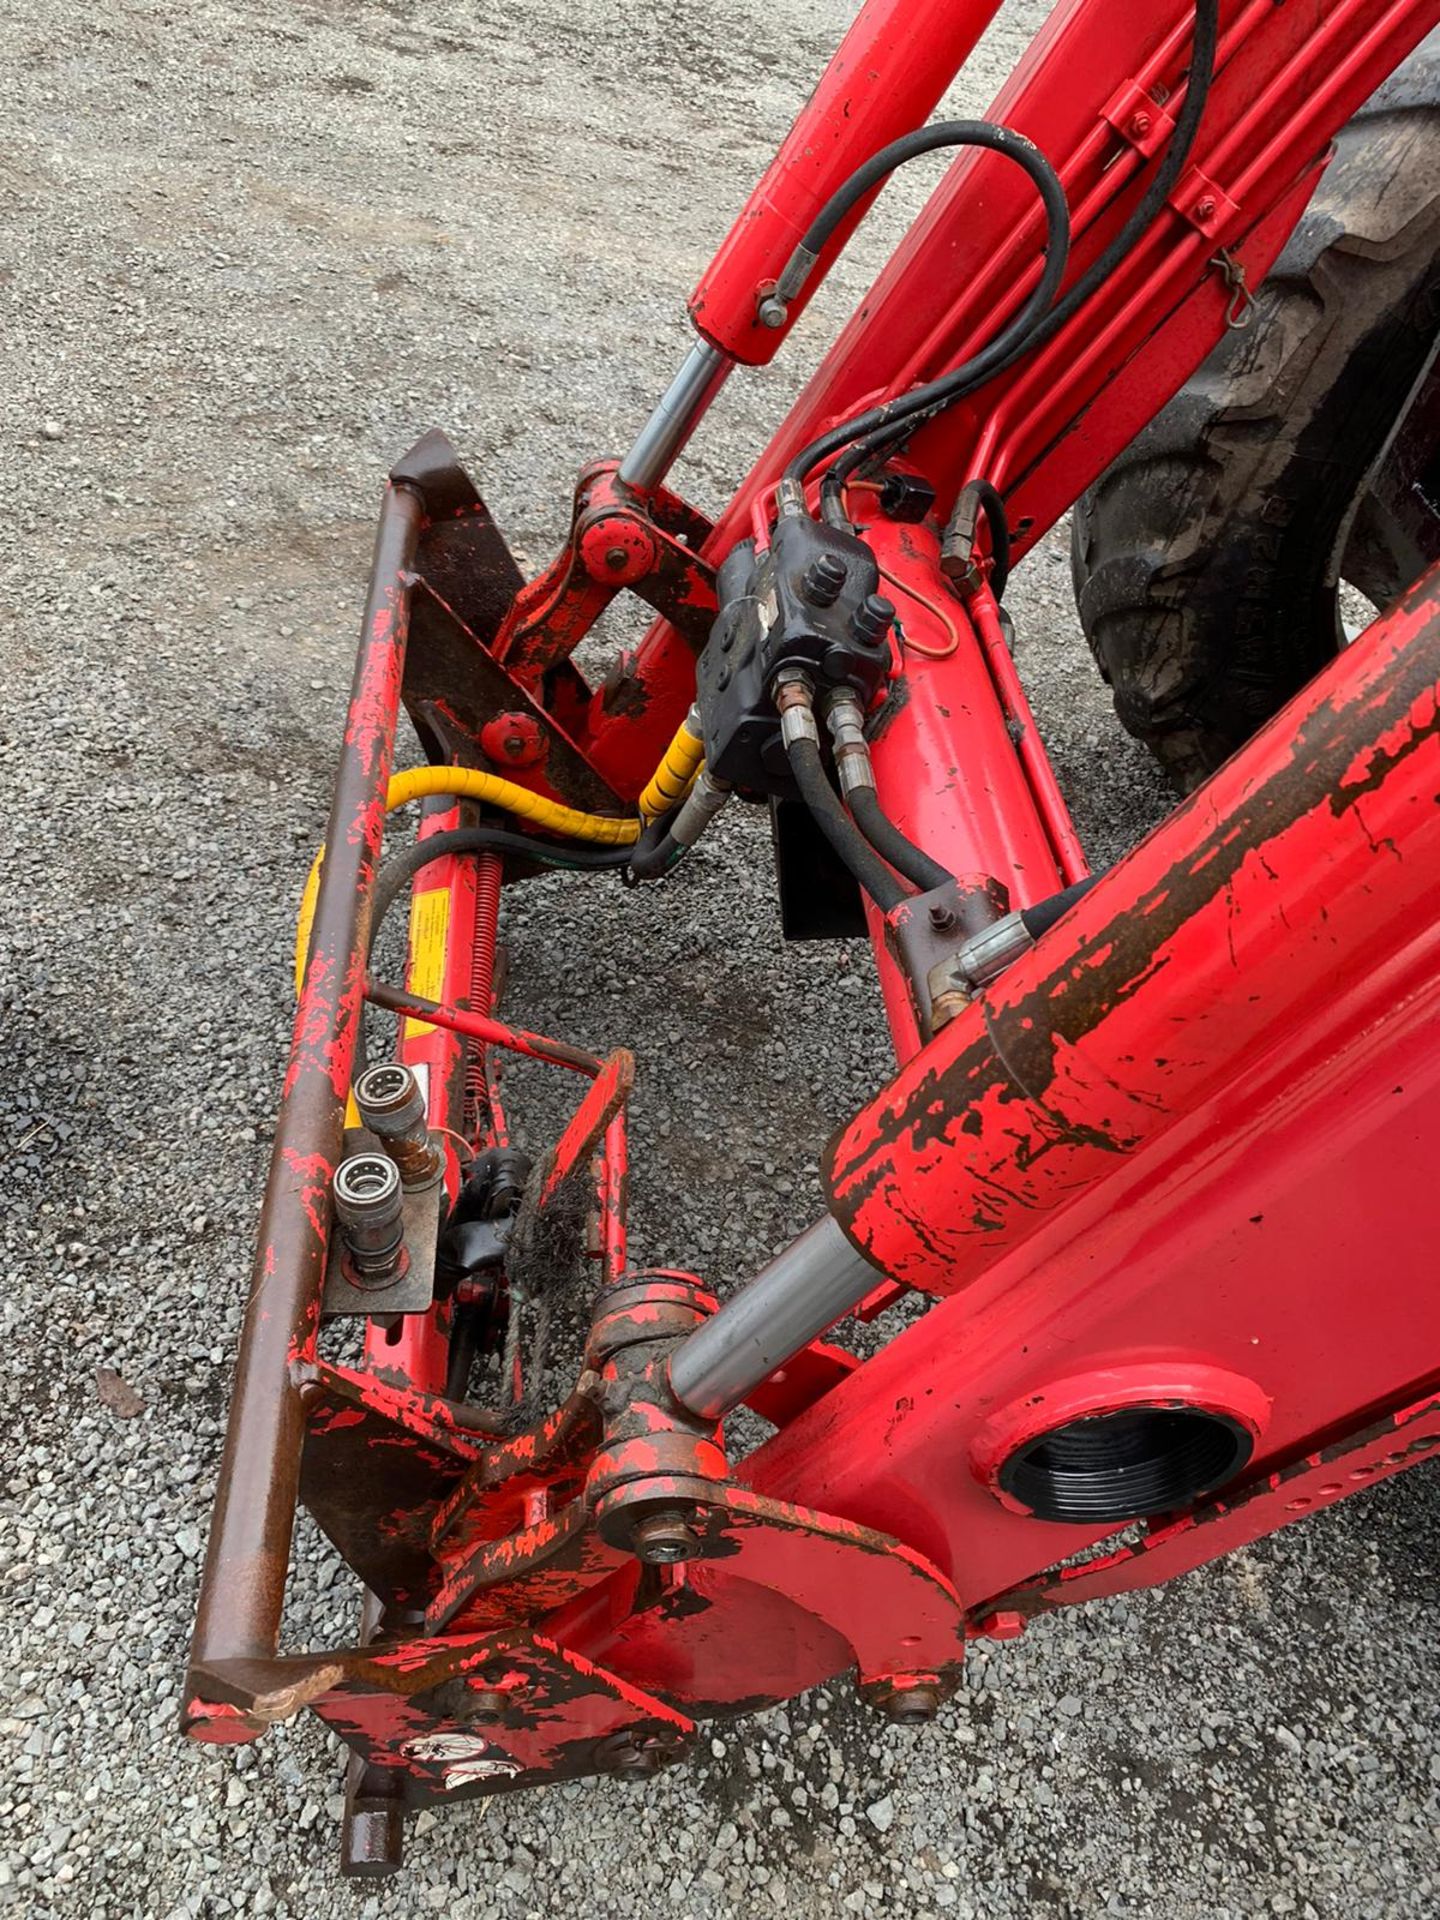 MASSEY FERGUSON 6455 TRACTOR WITH POWER LOADER 100HP - Image 8 of 15